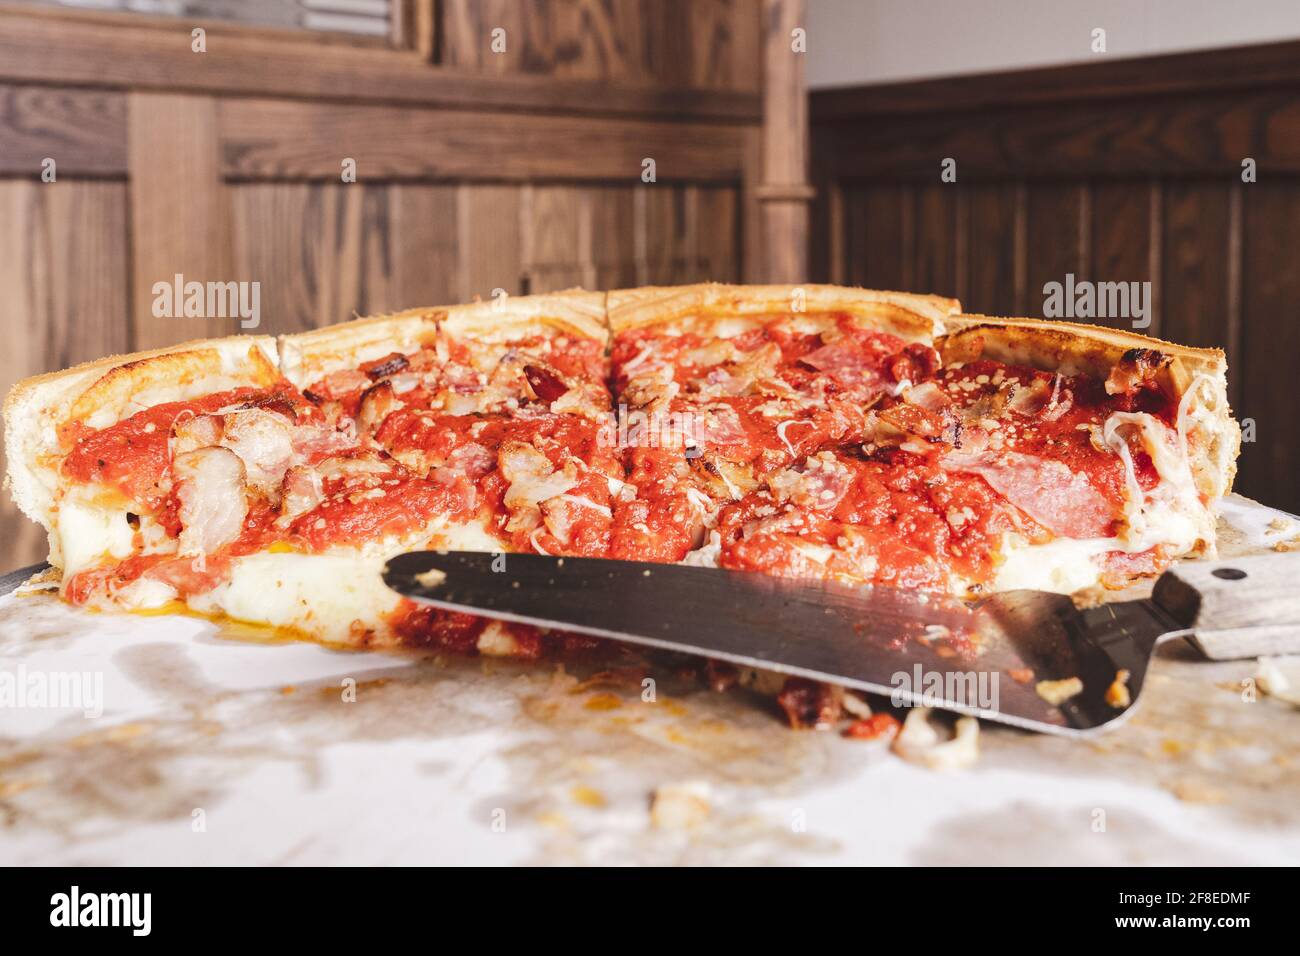 A World Famous Chicago Deep Dish Pizza Pie. Stock Photo